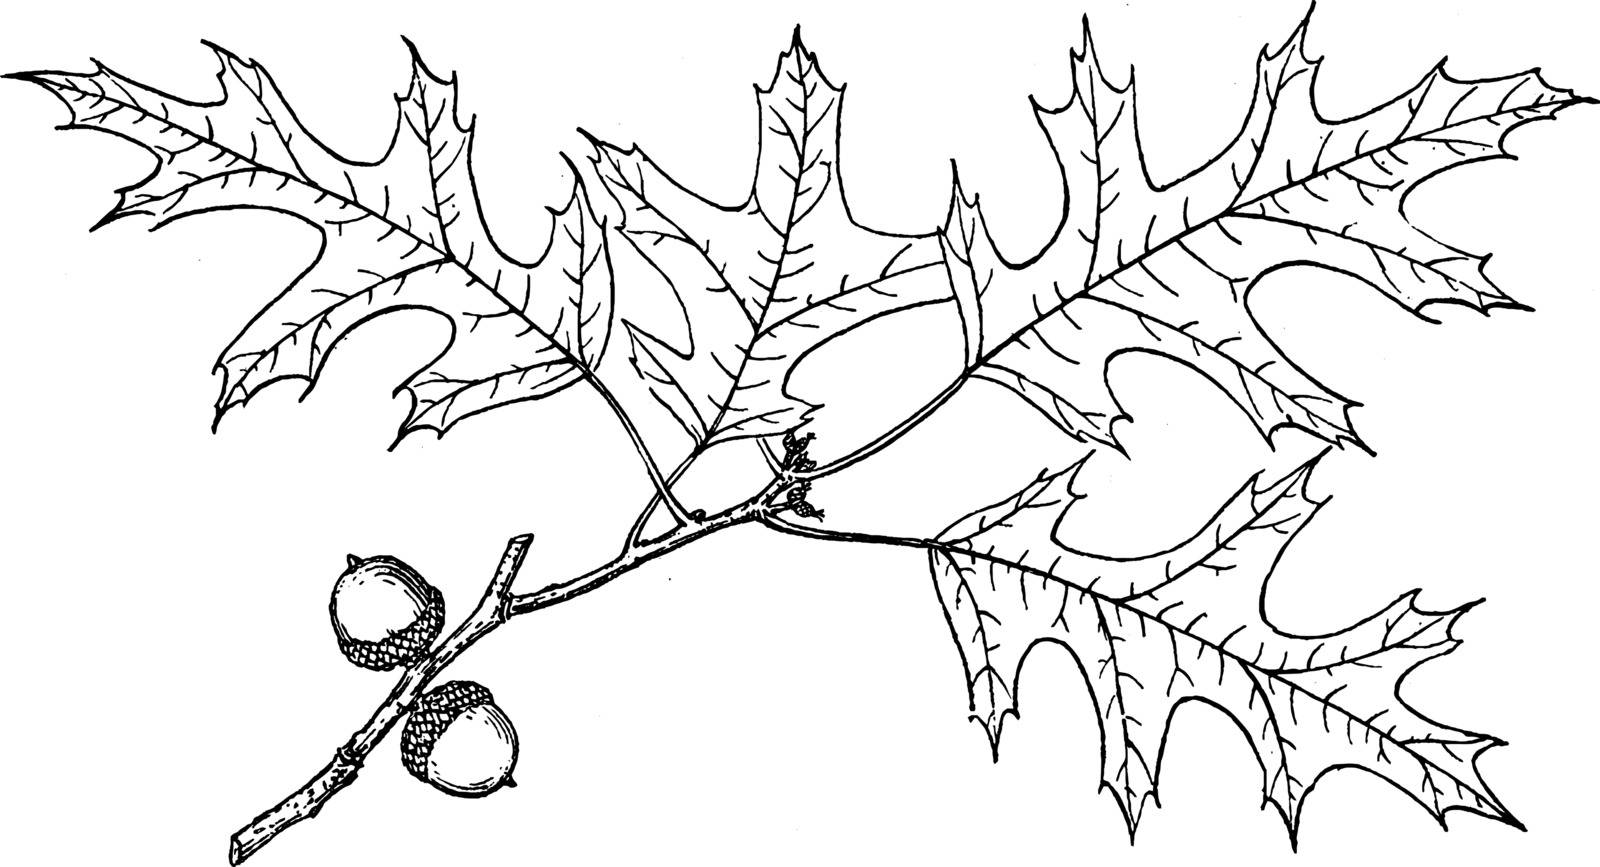 A picture of Branch of Swamp Spanish Oak. It is mostly found in rivers and on glacial till plains in the north-central and eastern United States, vintage line drawing or engraving illustration.